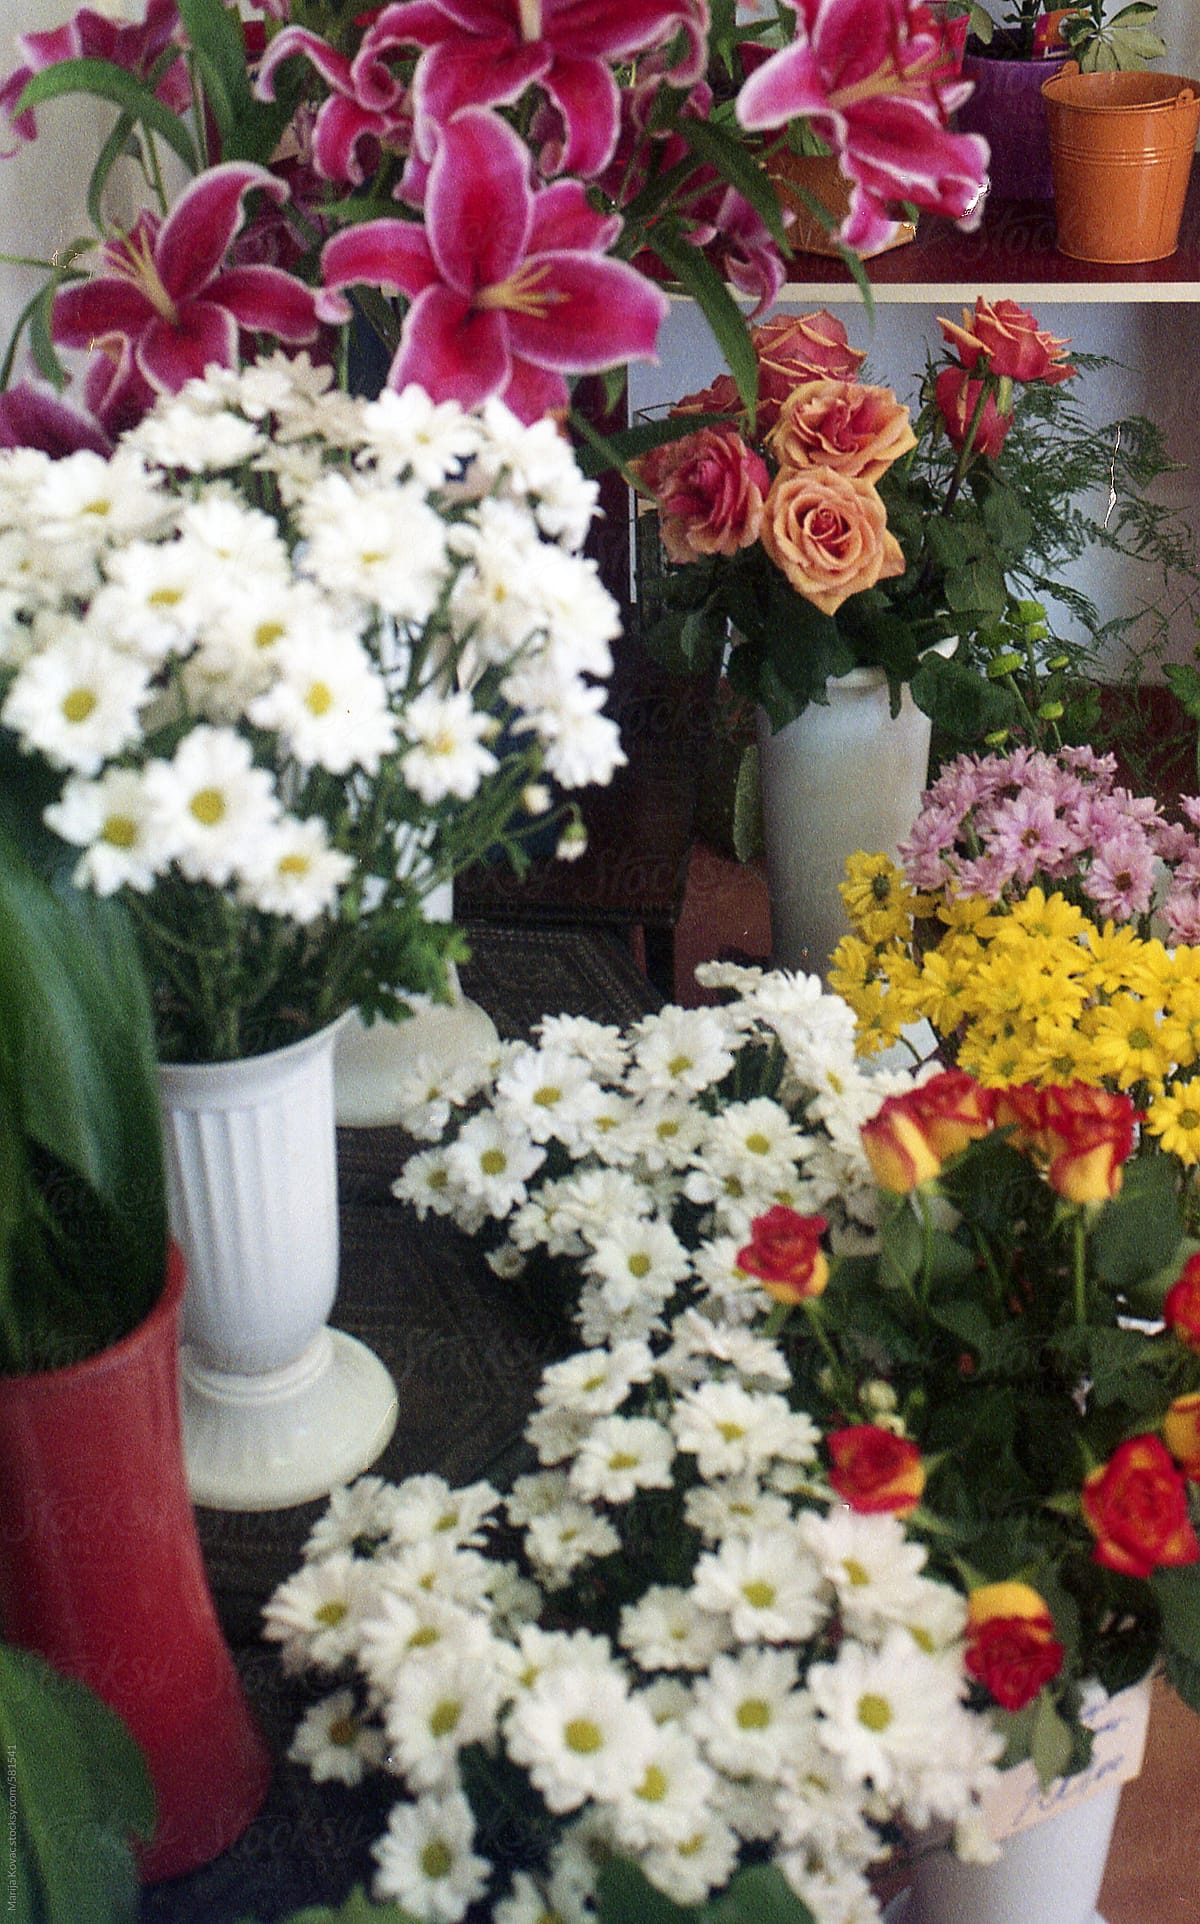 Lots of colorful flowers in a flower shop